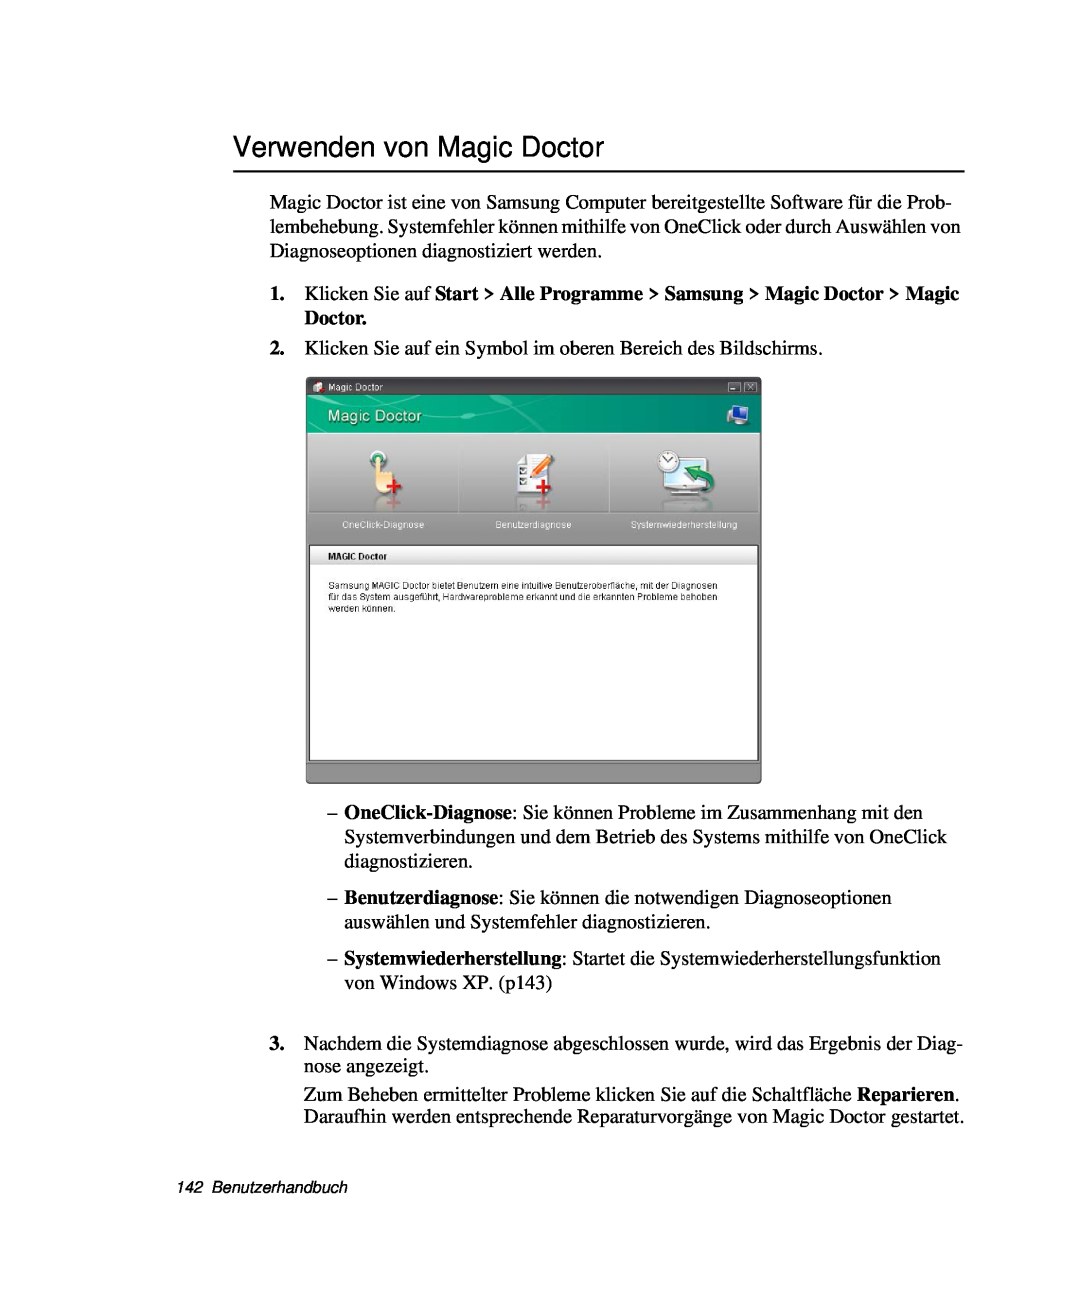 Samsung NP-R40FY0C/SEG, NP-R40FY0B/SEG, NP-R40FY03/SEG, NP-R40FY01/SEG, NP-R40K007/SEG manual Verwenden von Magic Doctor 